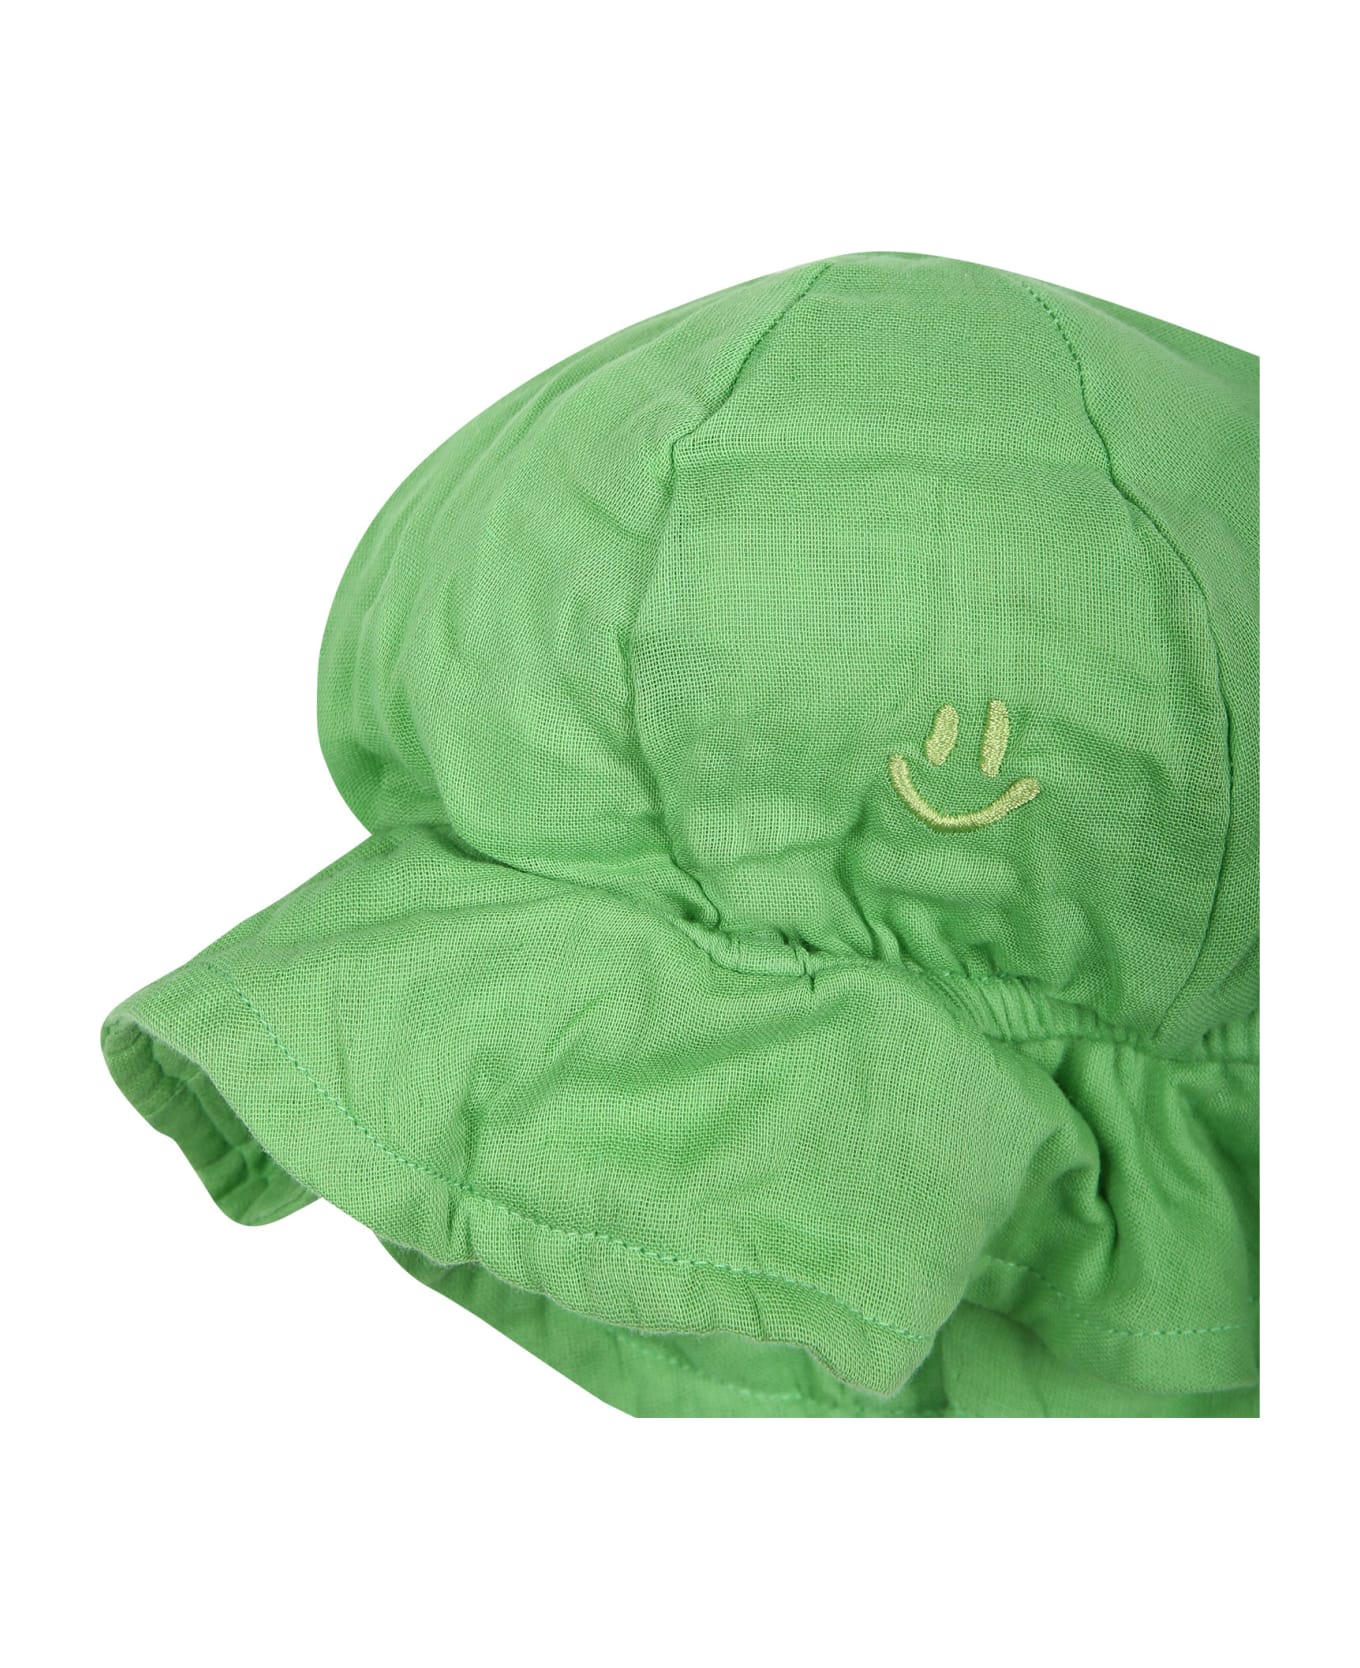 Molo Green Cloche For Bébé Kids With Smile - Green アクセサリー＆ギフト